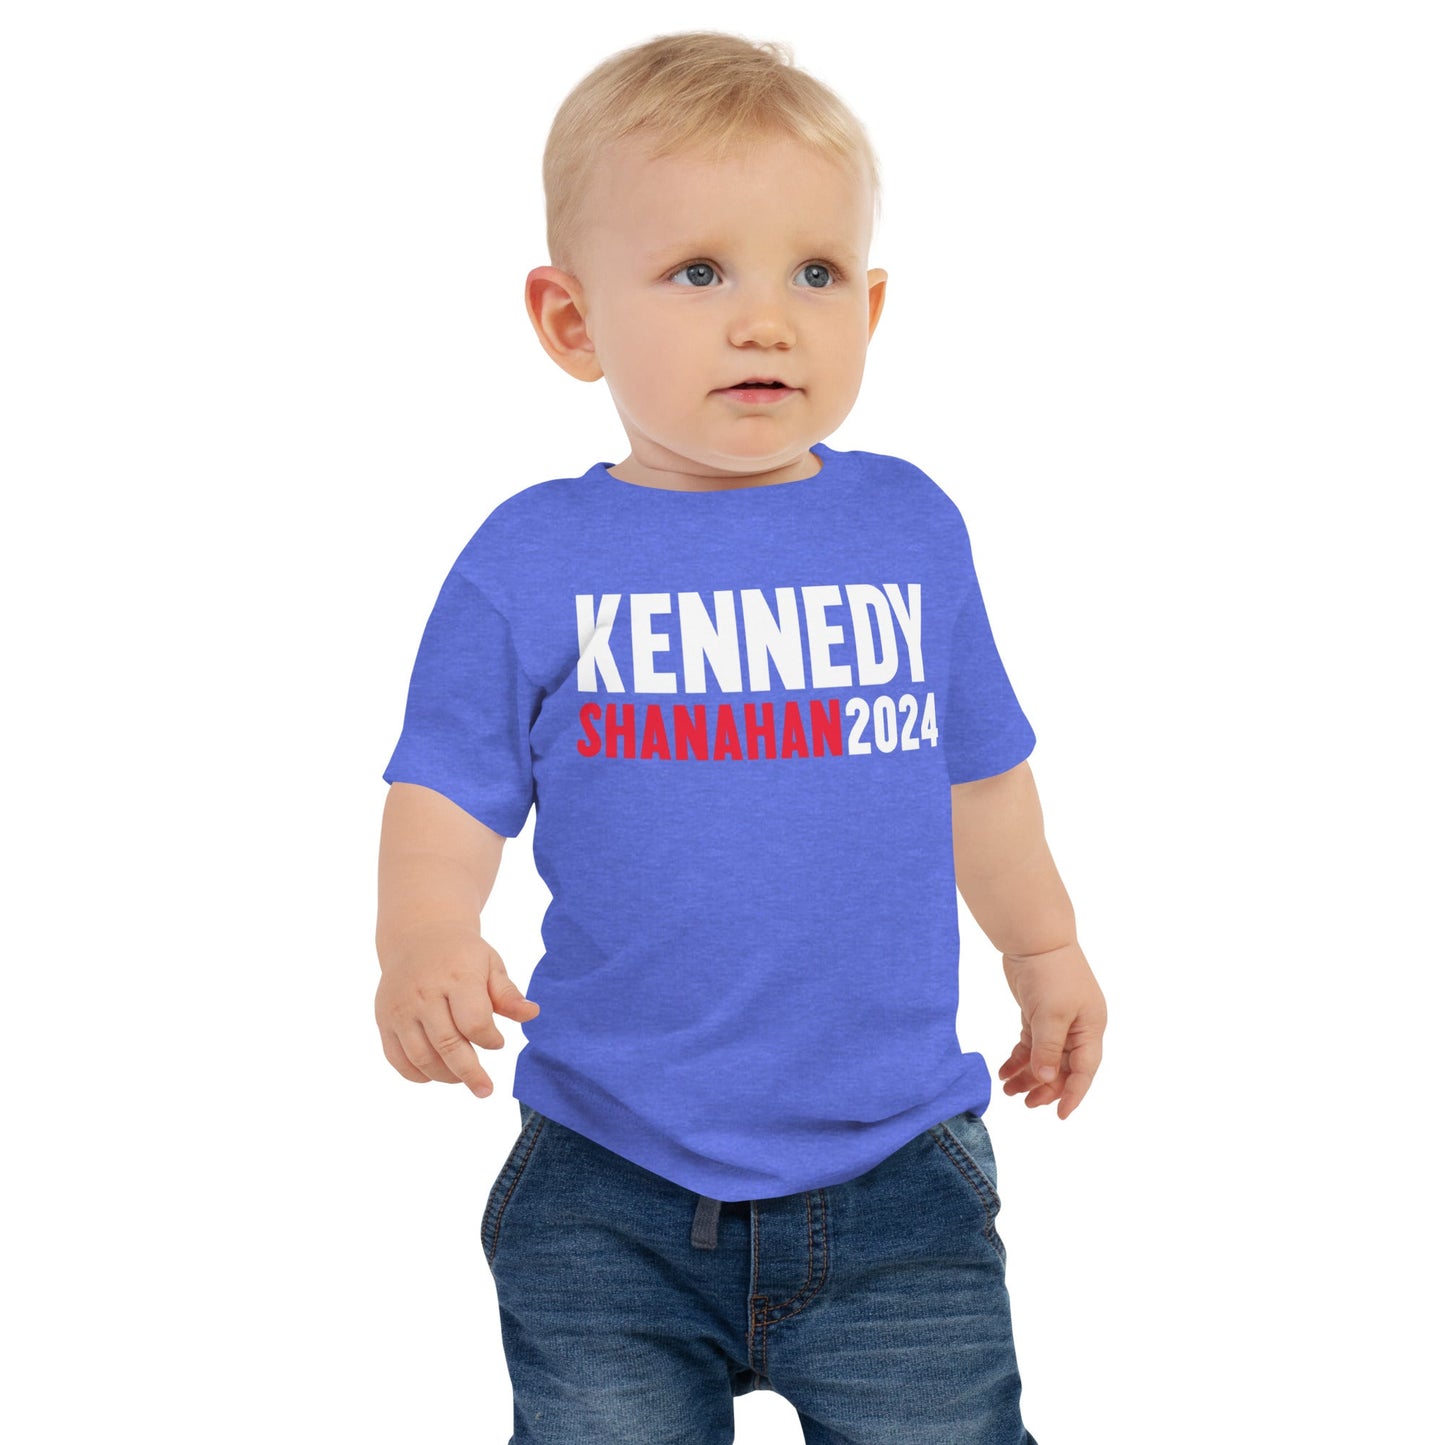 Kennedy Shanahan Baby Tee - TEAM KENNEDY. All rights reserved